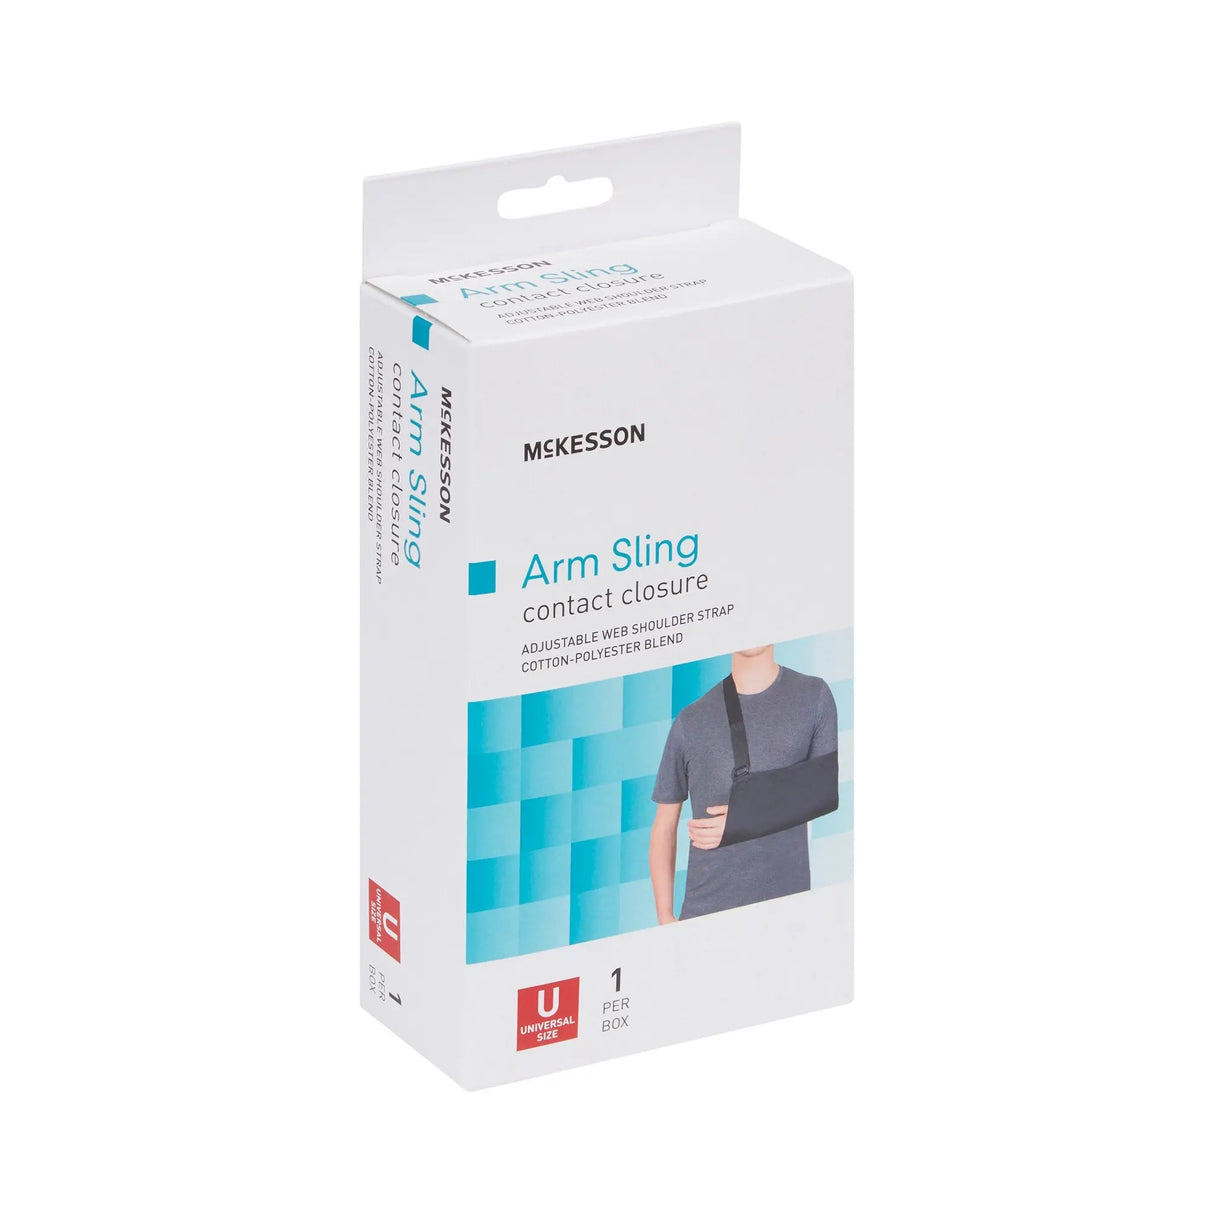 McKesson Arm Sling, One Size Fits All - getMovility